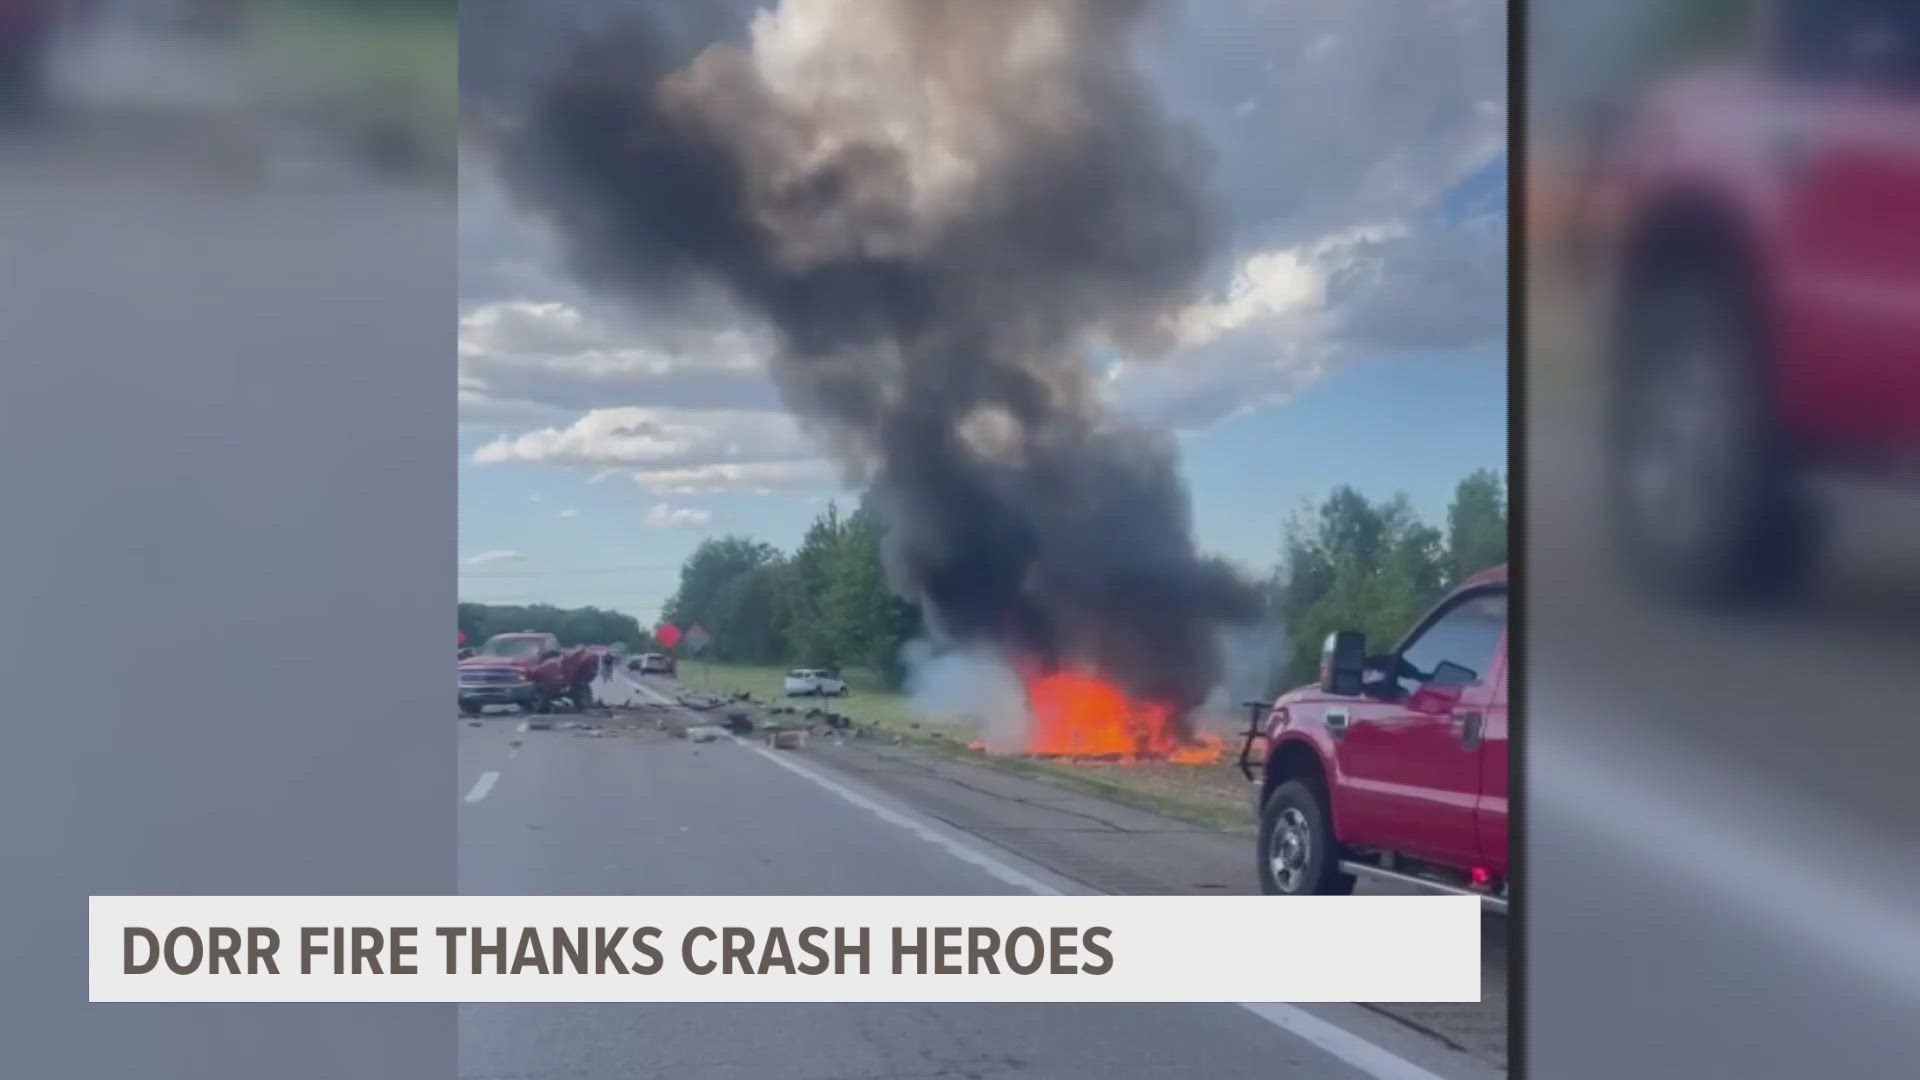 The Dorr Fire Department is thanking two women who jumped in to help at the scene of a serious crash.